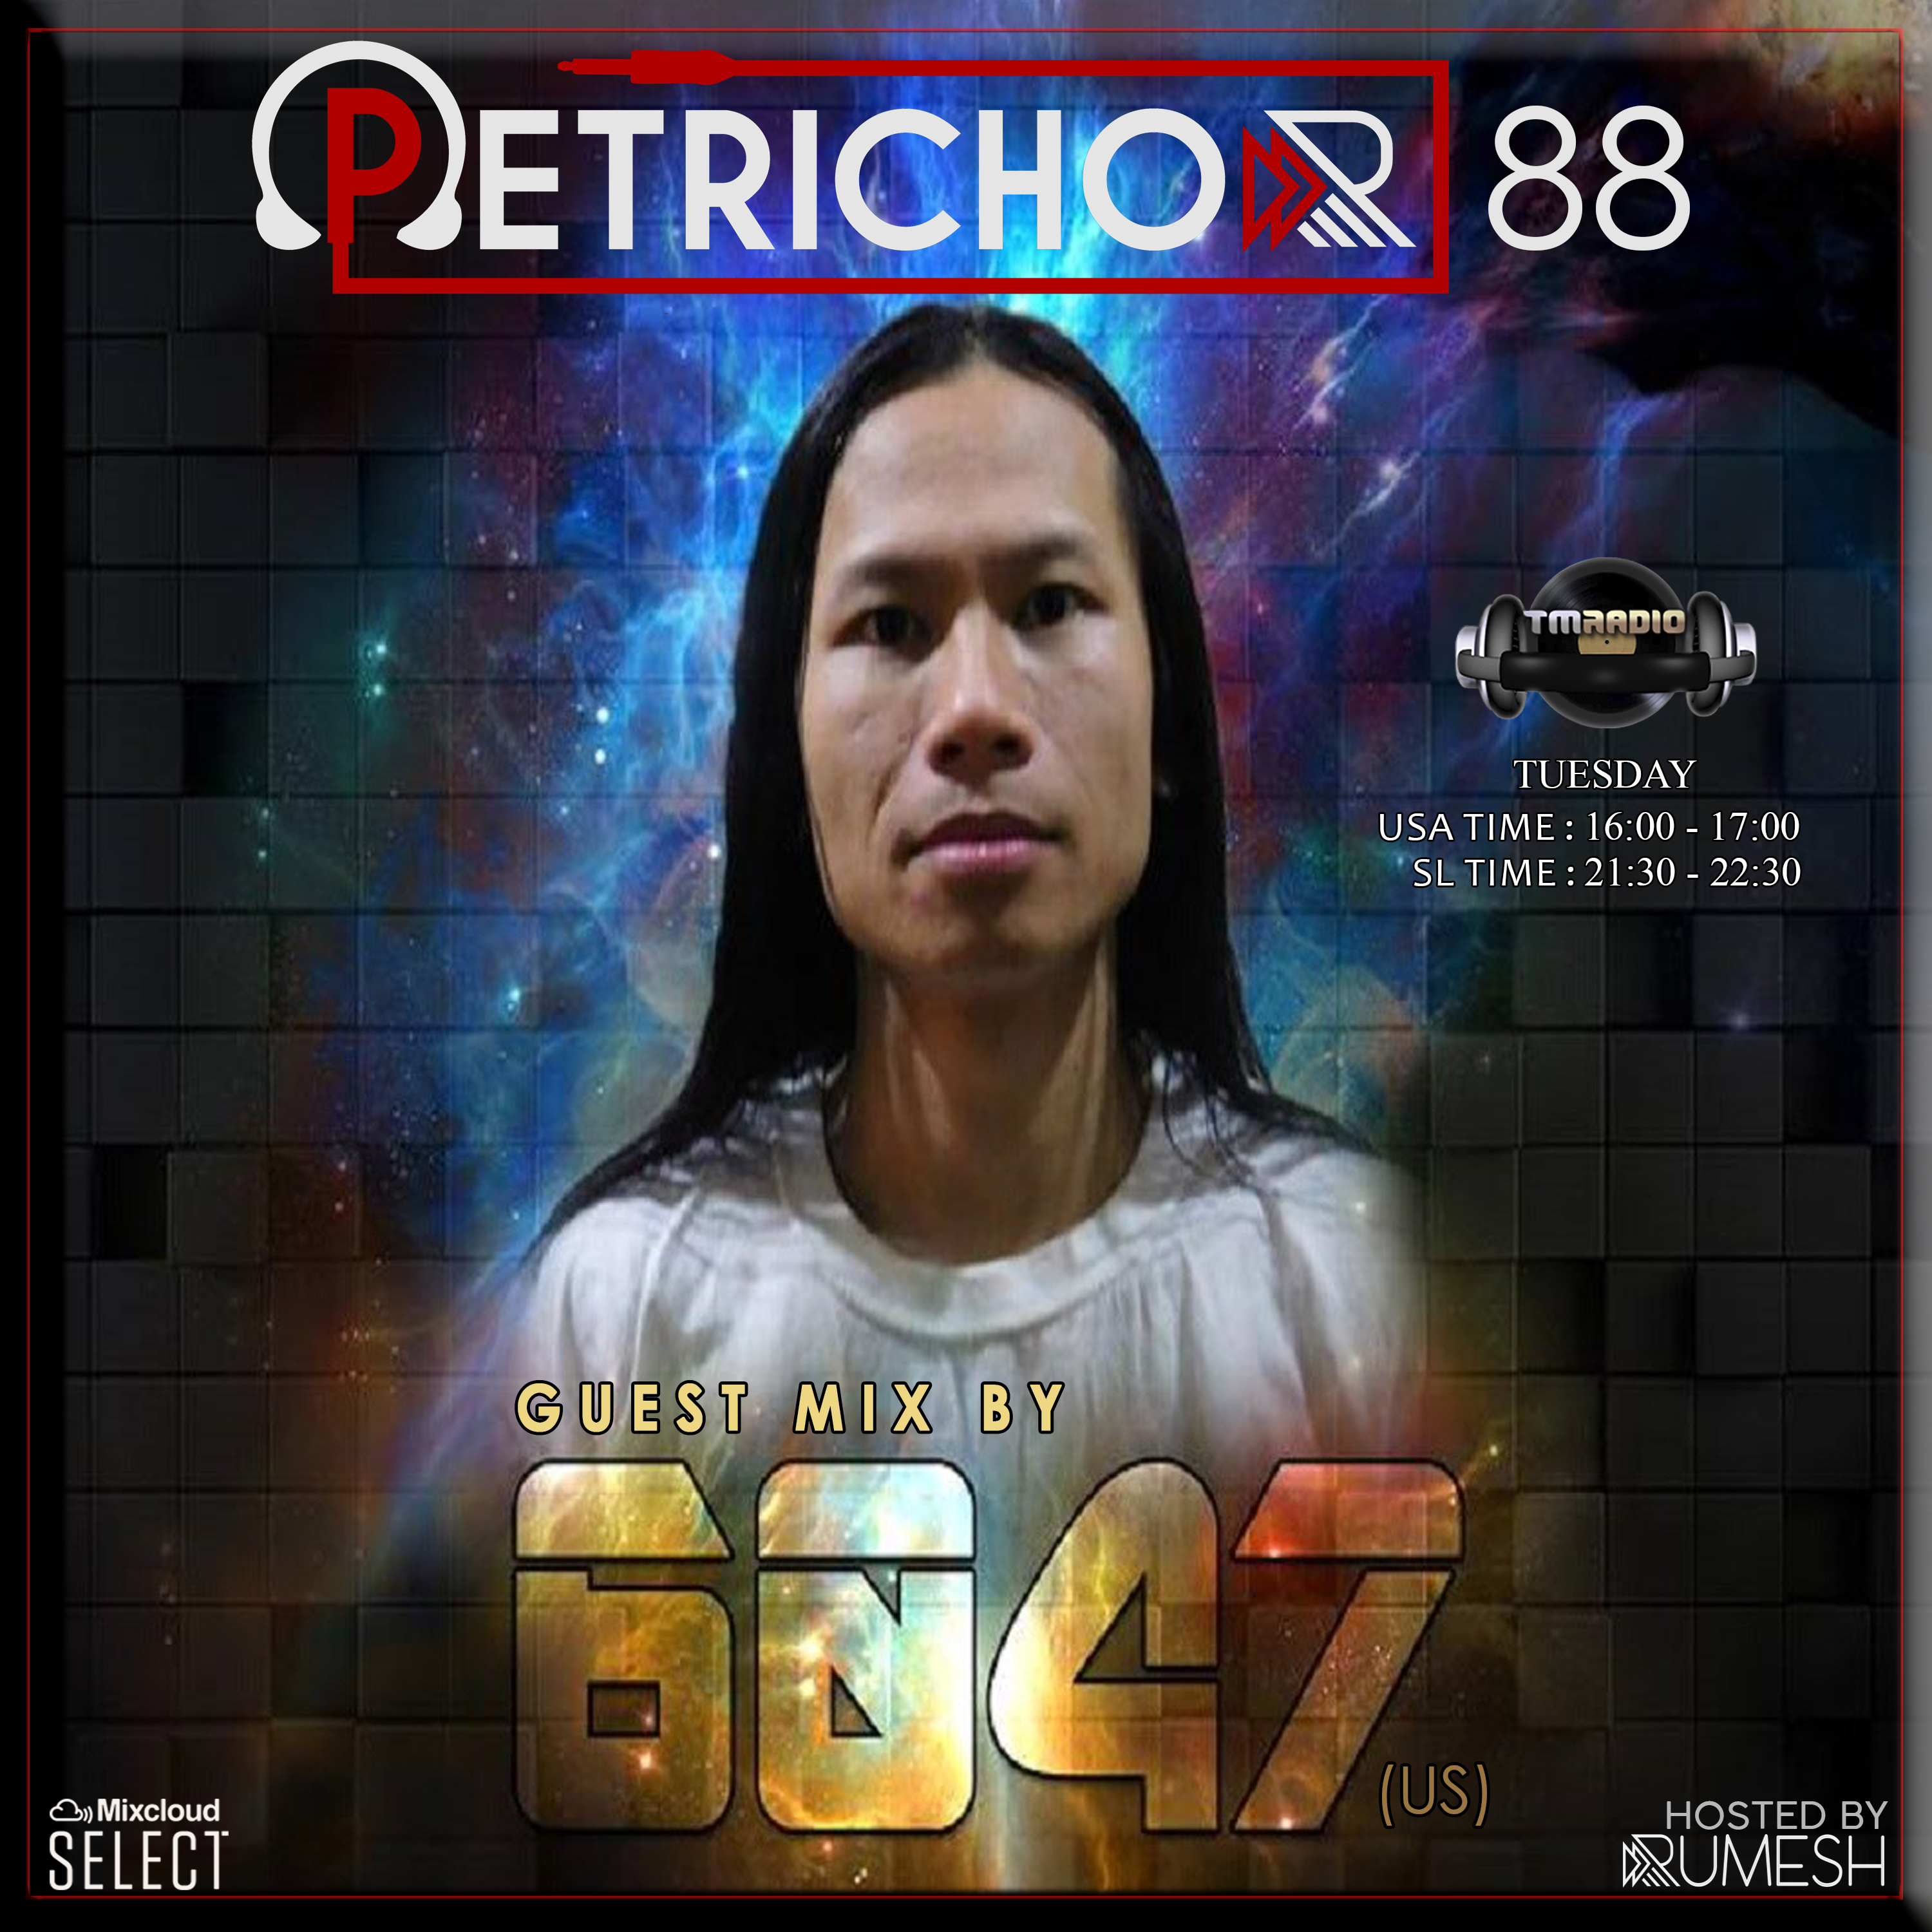 Petrichor 88 Guest Mix by 6047 (US) (from August 18th, 2020)